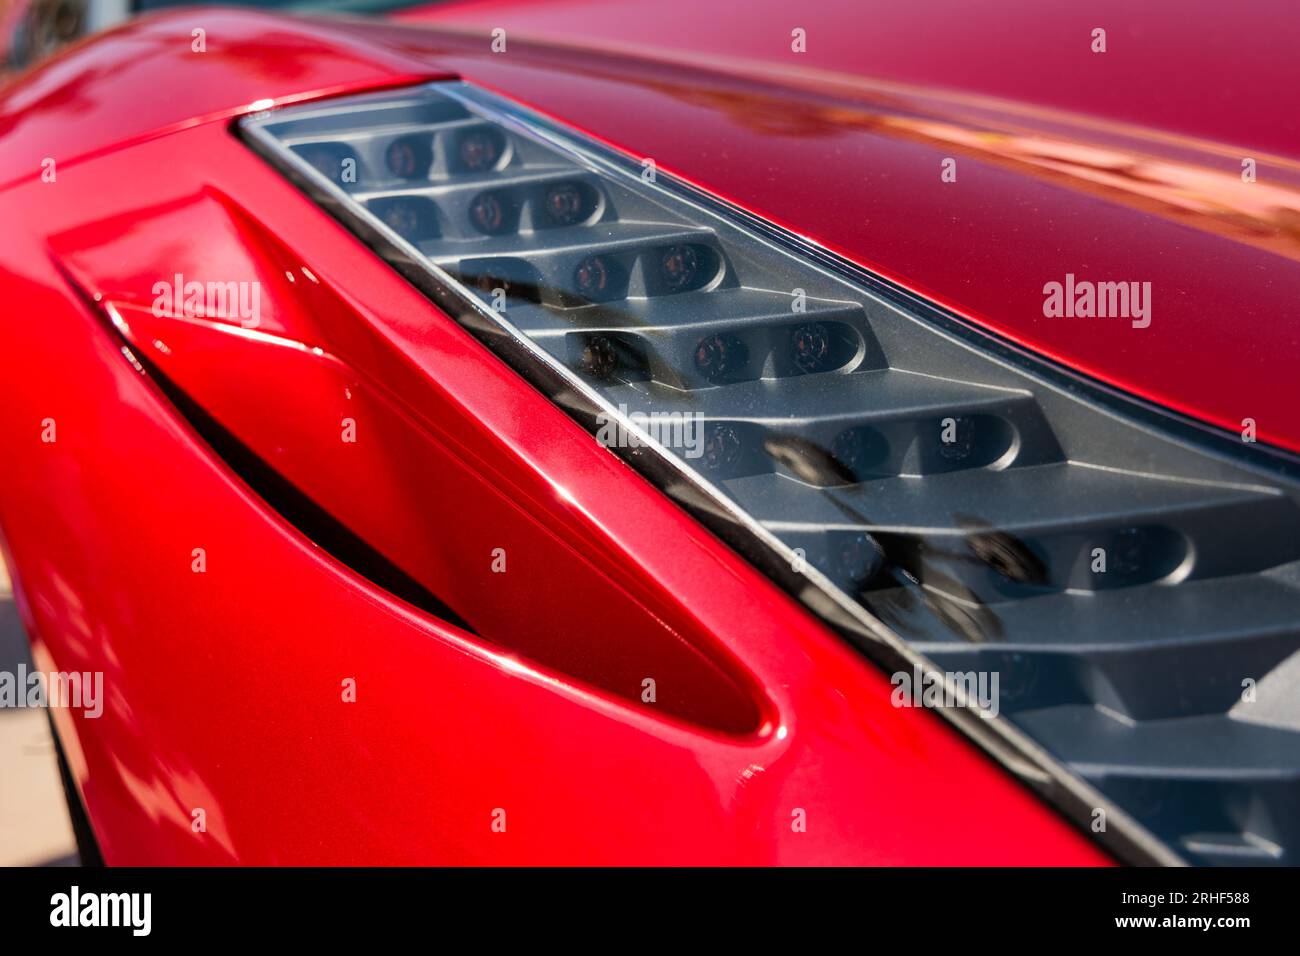 Ferrari 458 Spider, close up view of front headlamps Stock Photo